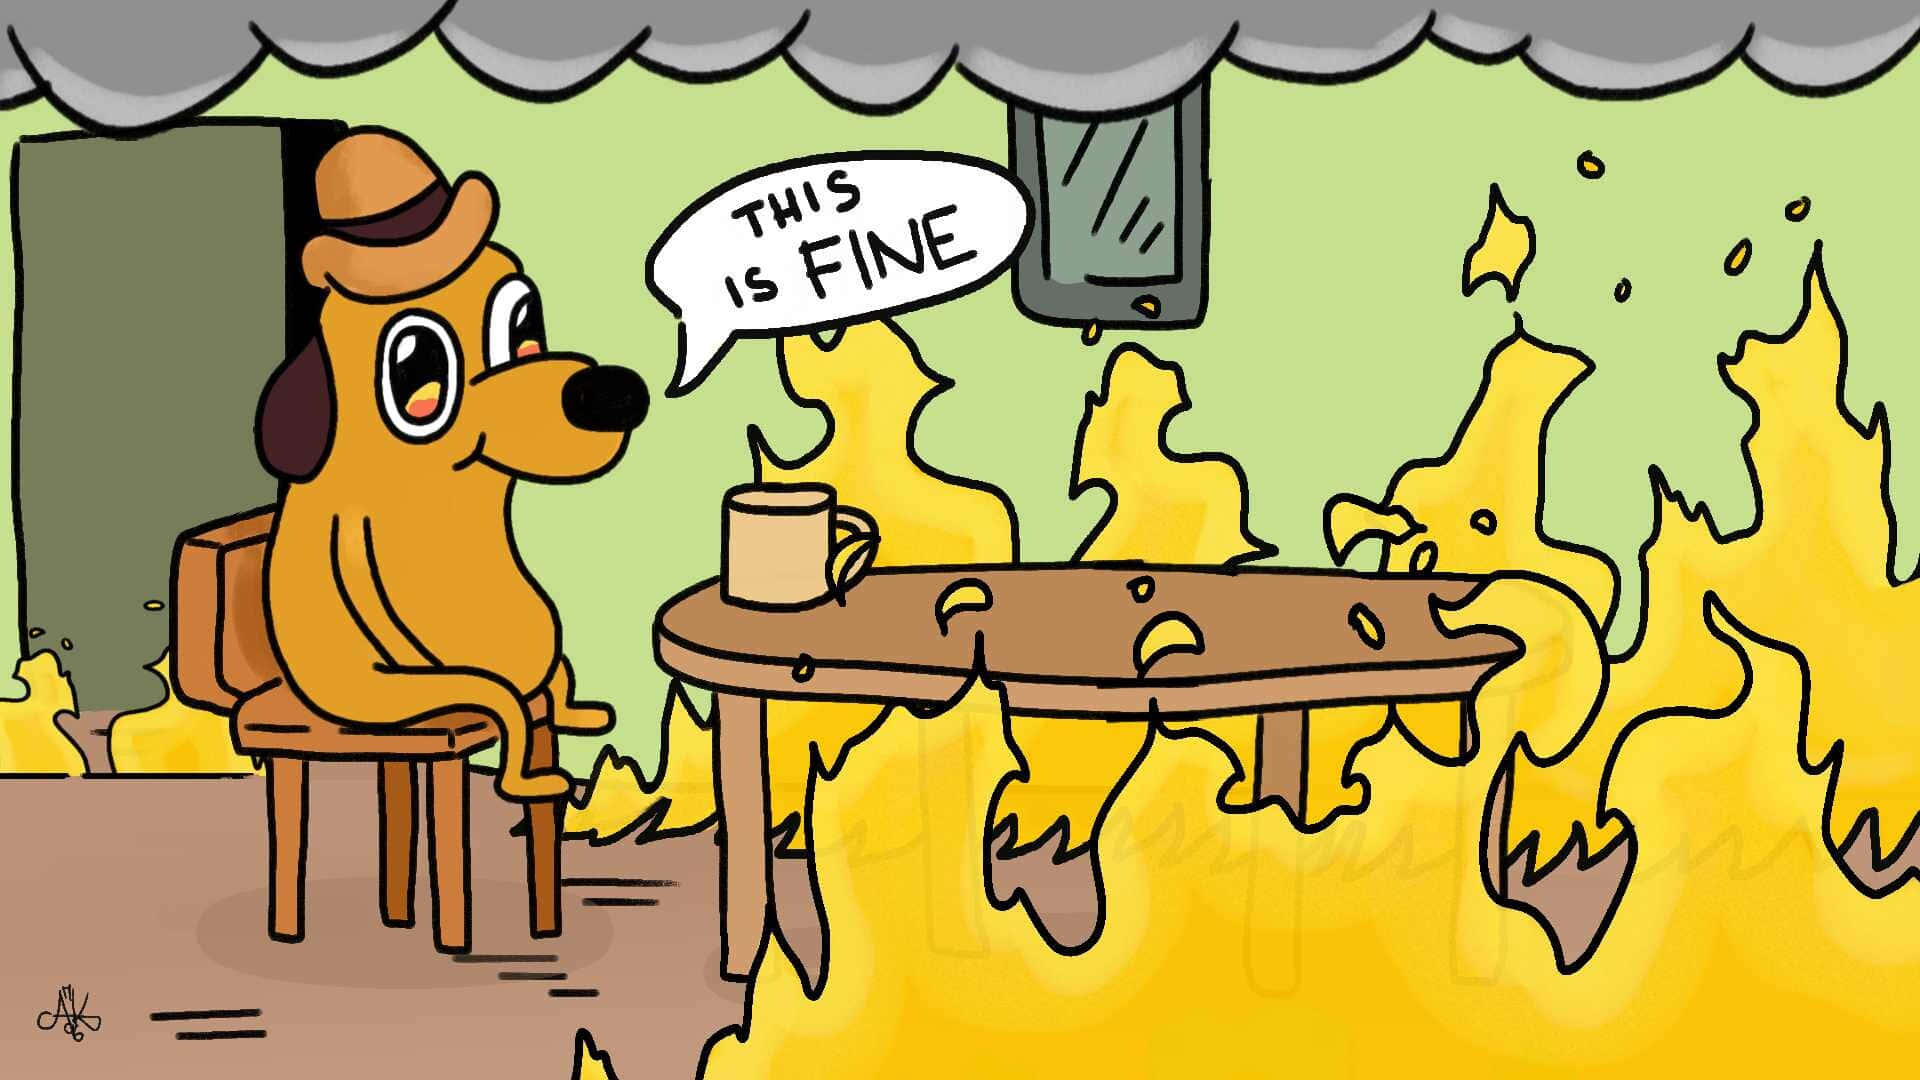 This Is Fine Wallpapers  Wallpaper Cave